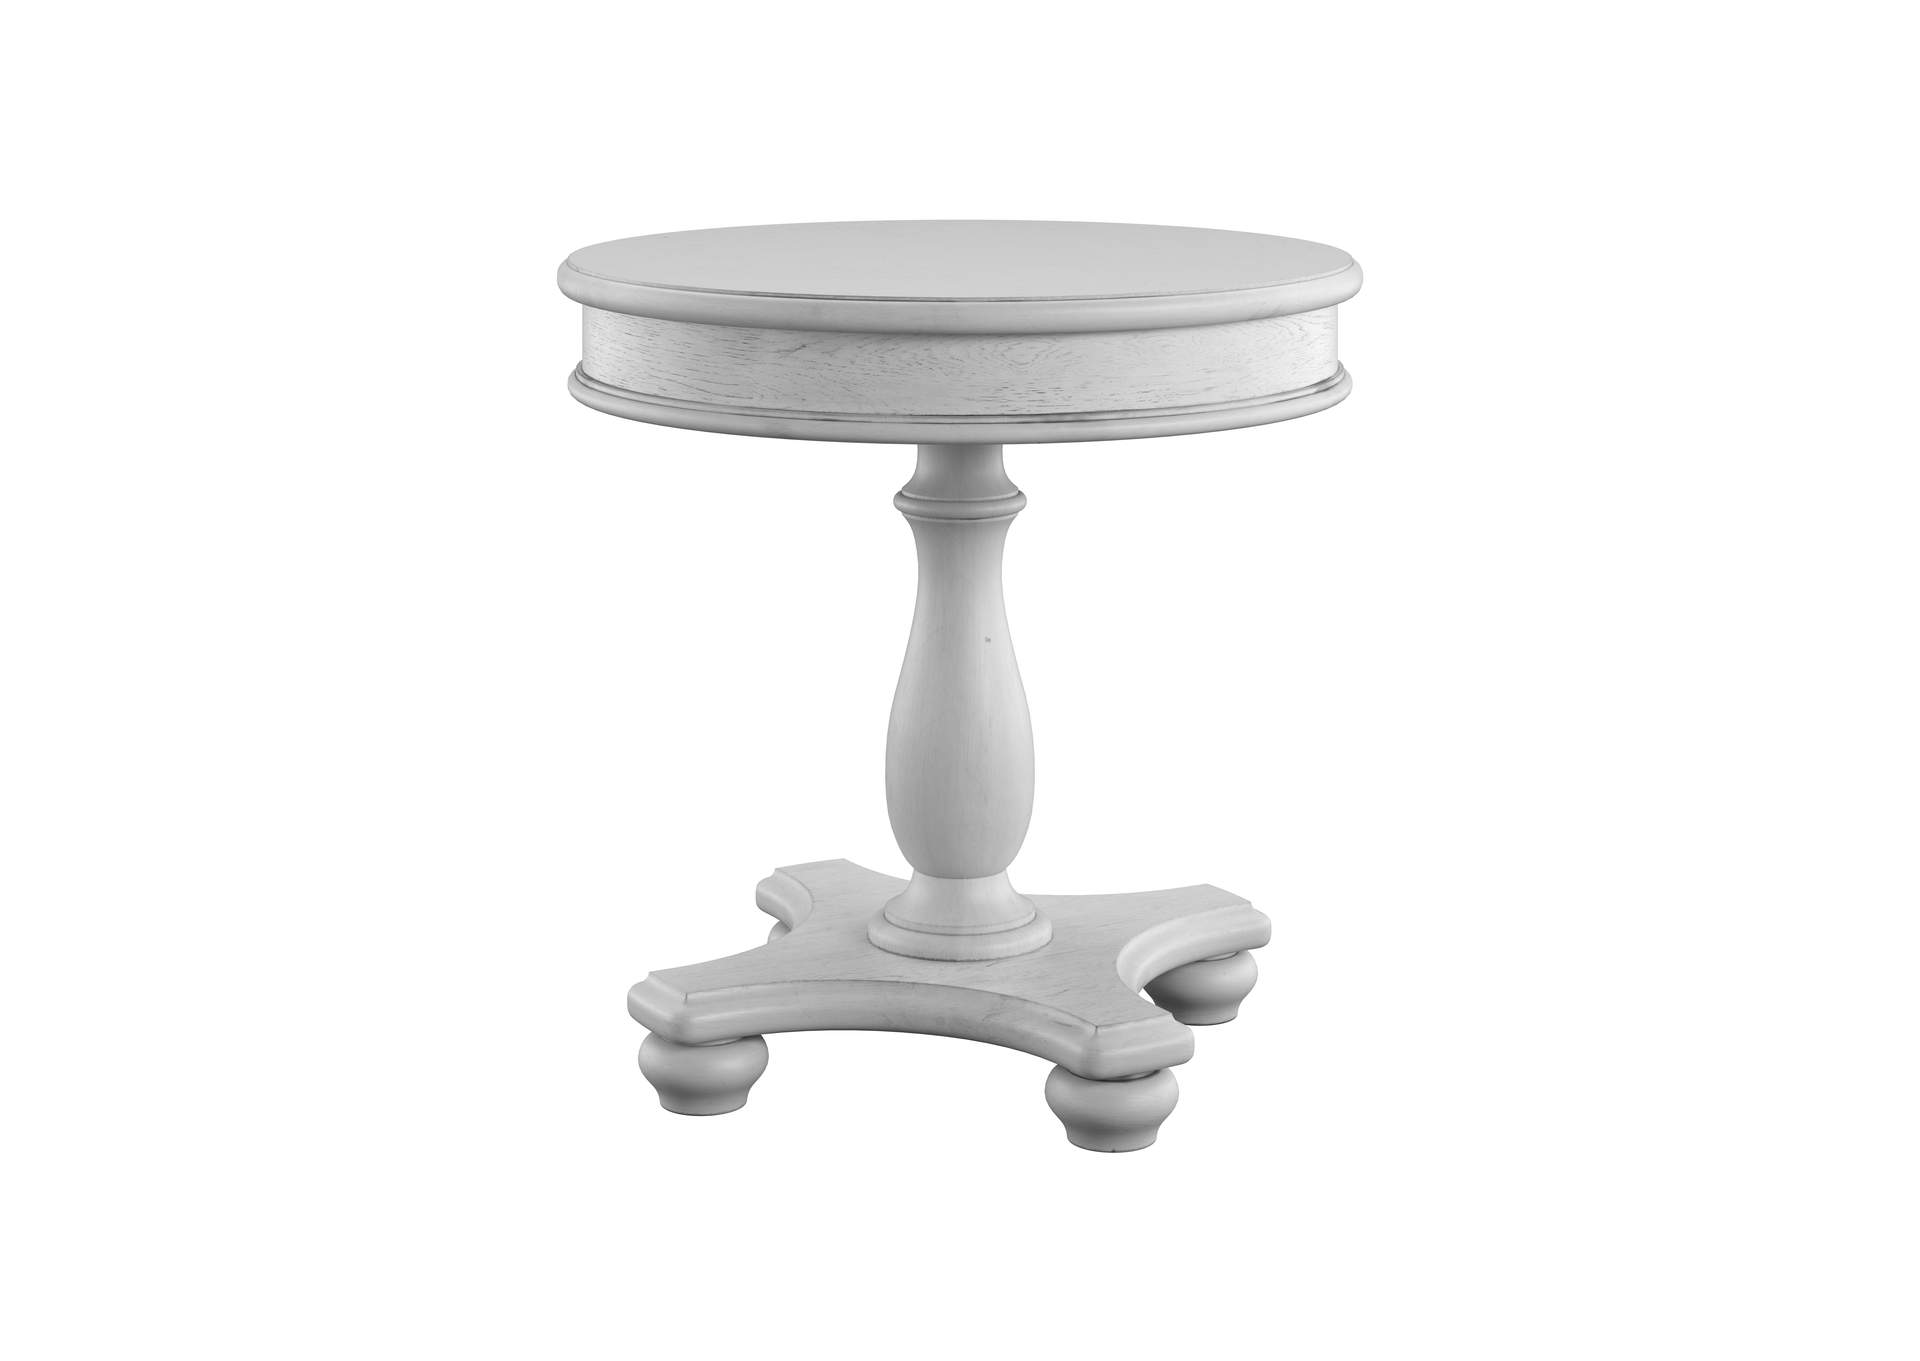 New Haven Round End Table,Emerald Home Furnishings